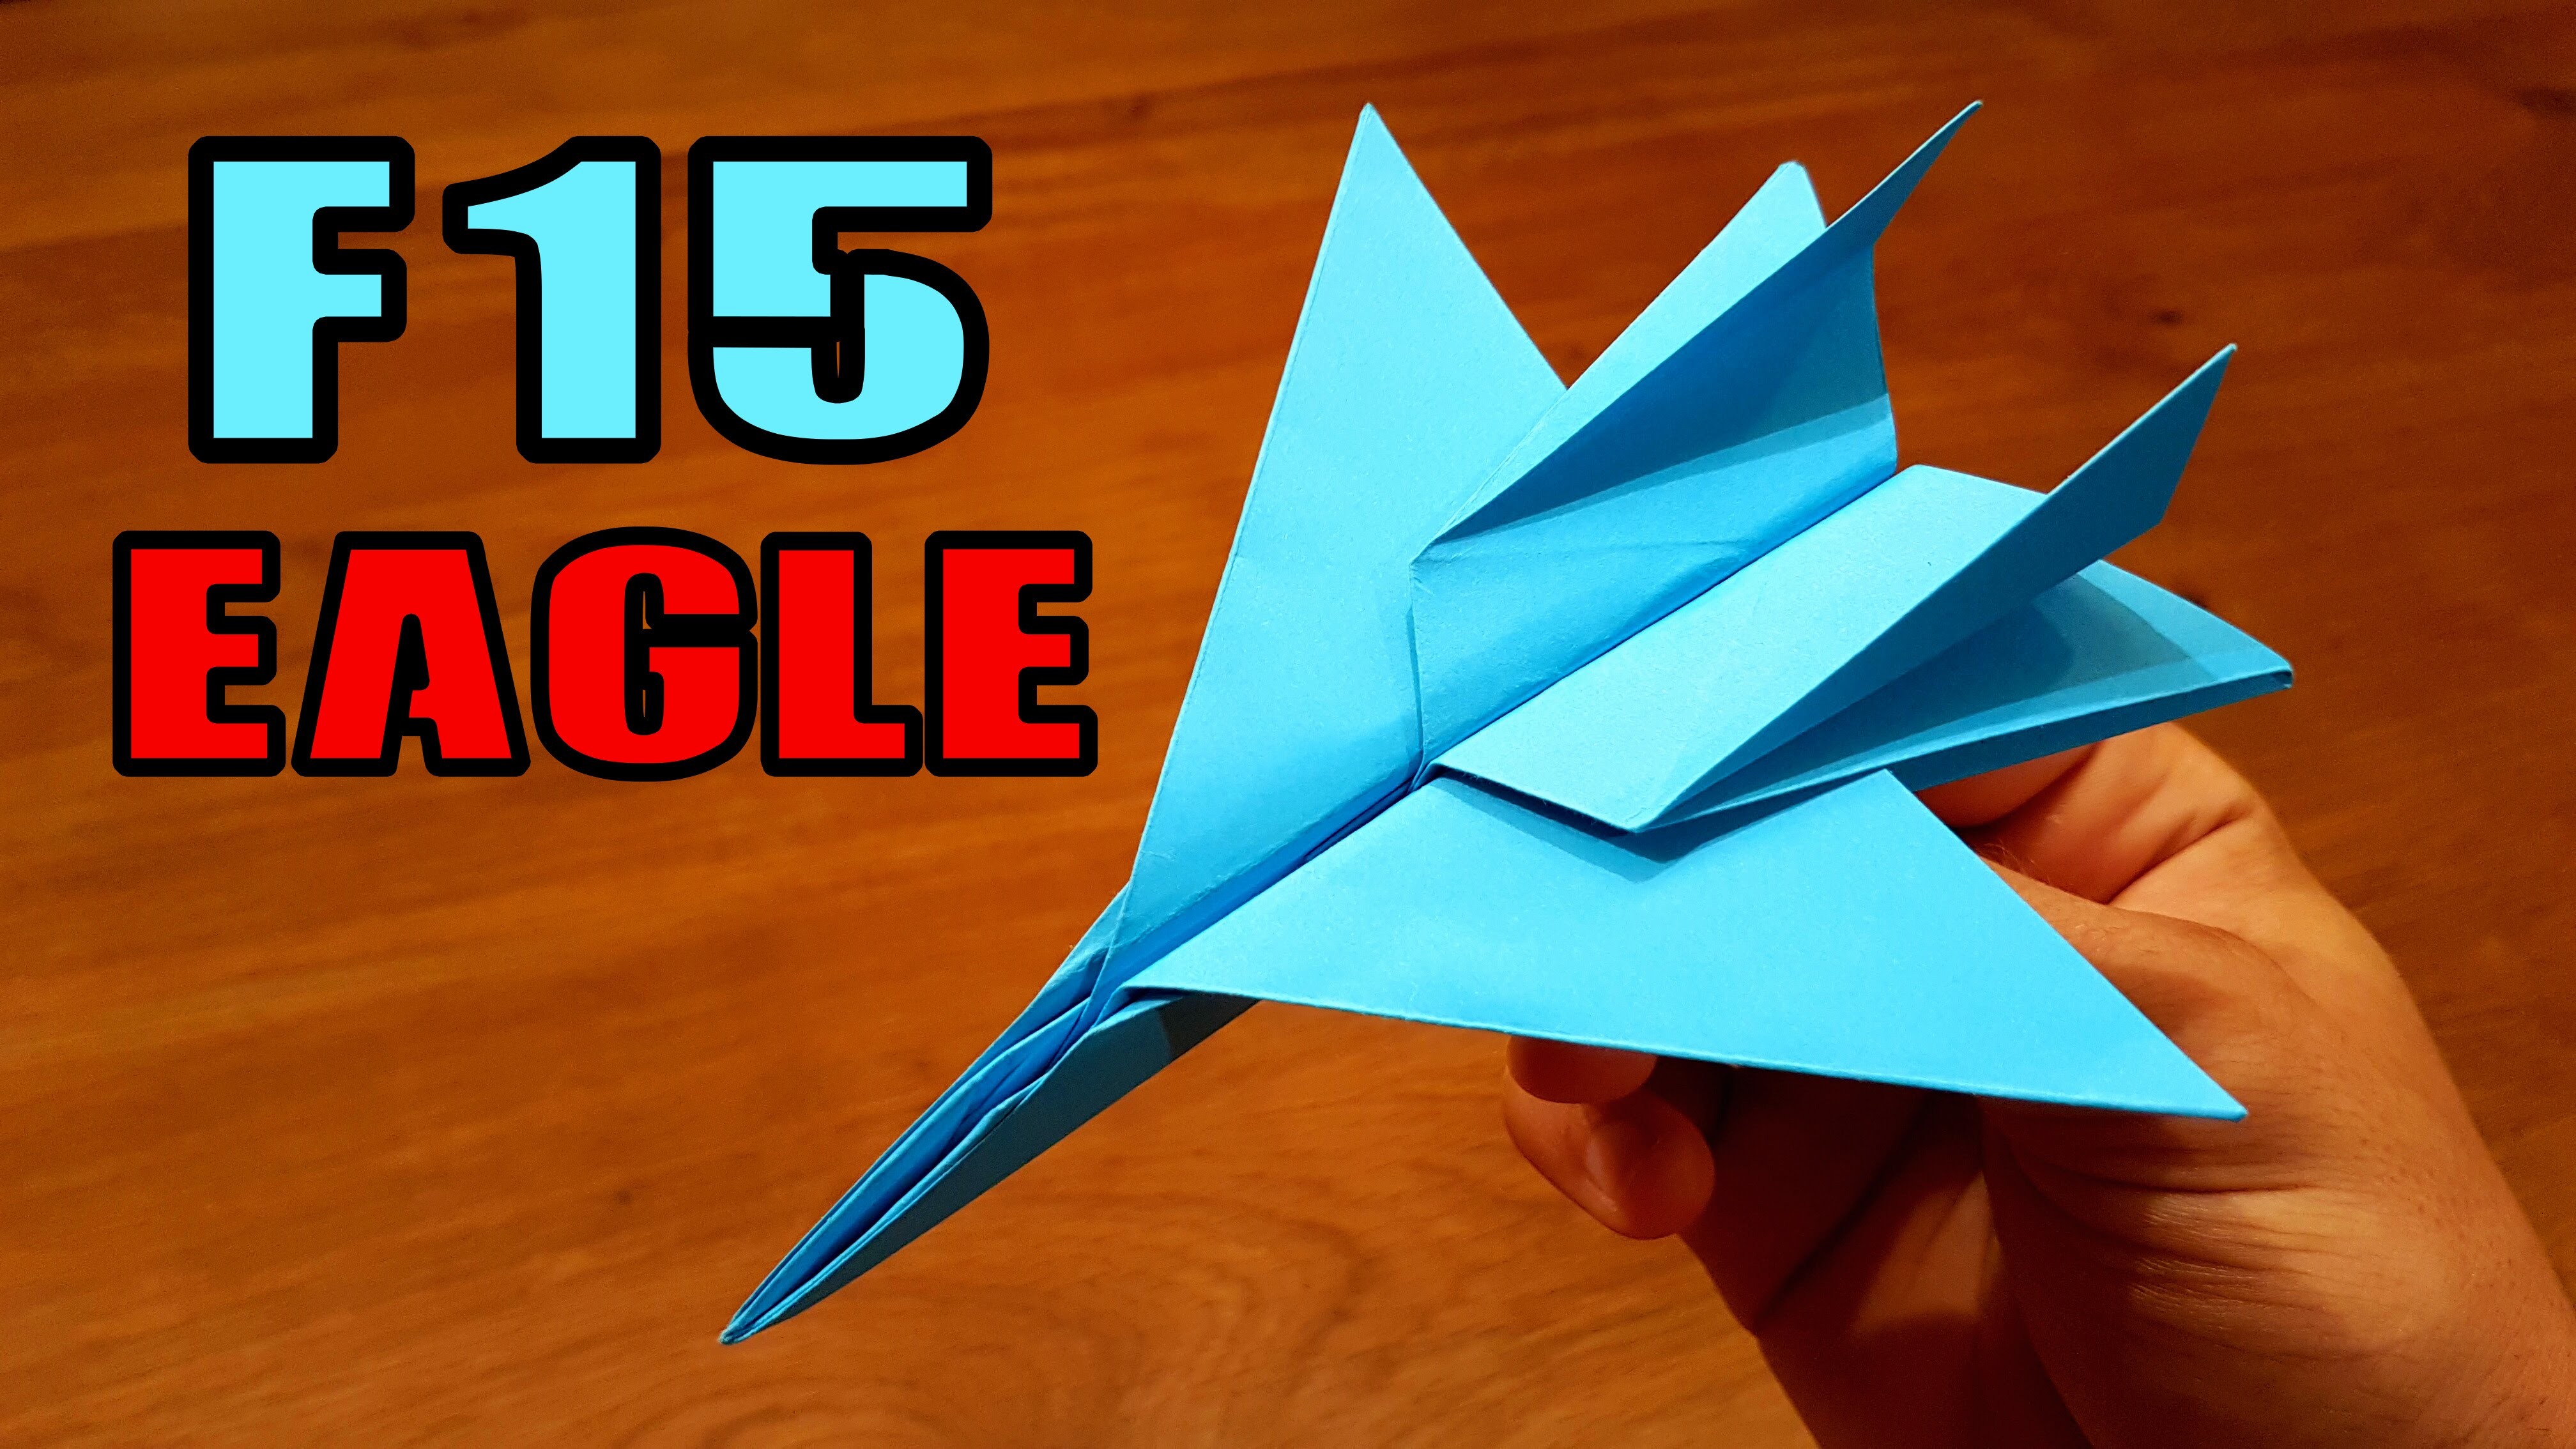 How To Make an F15 Paper Airplane, Origami F15 Jet Fighter Plane